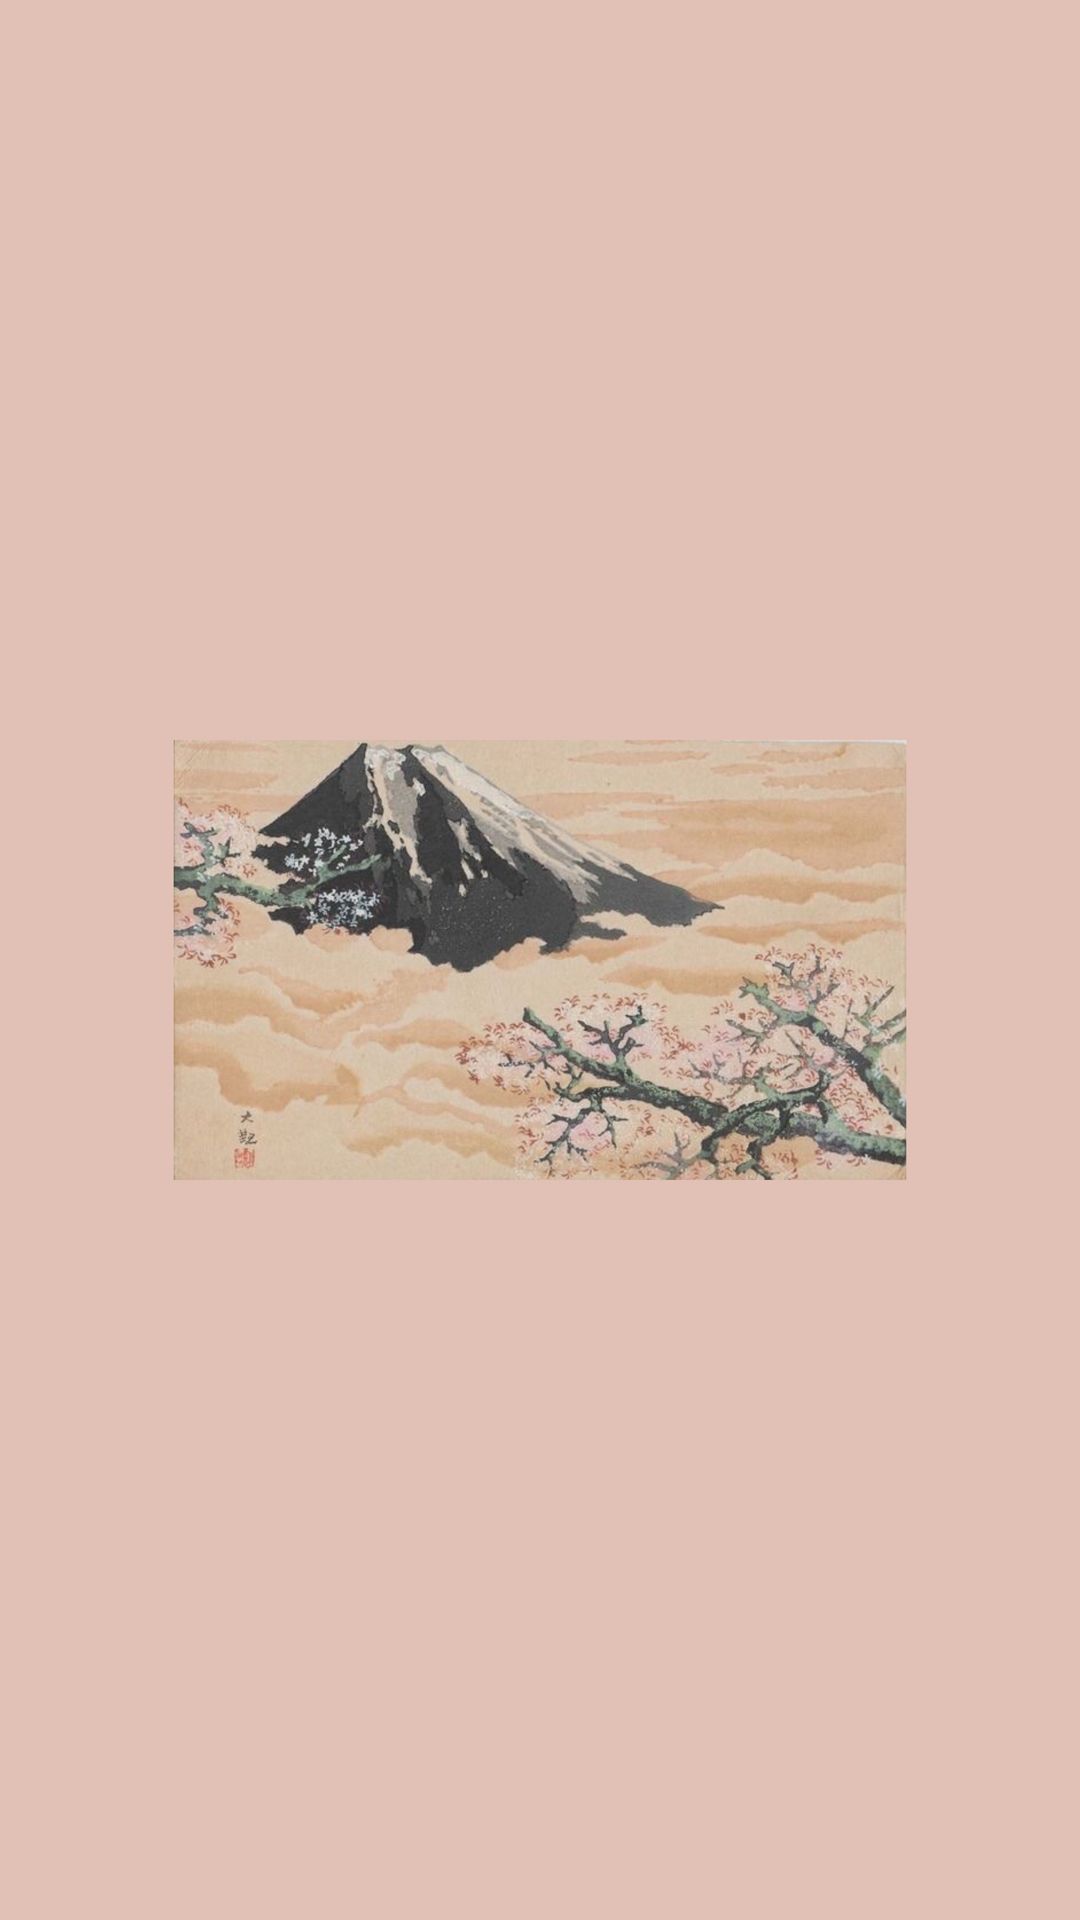 A painting of the japanese mountain with pink background - Art, blush